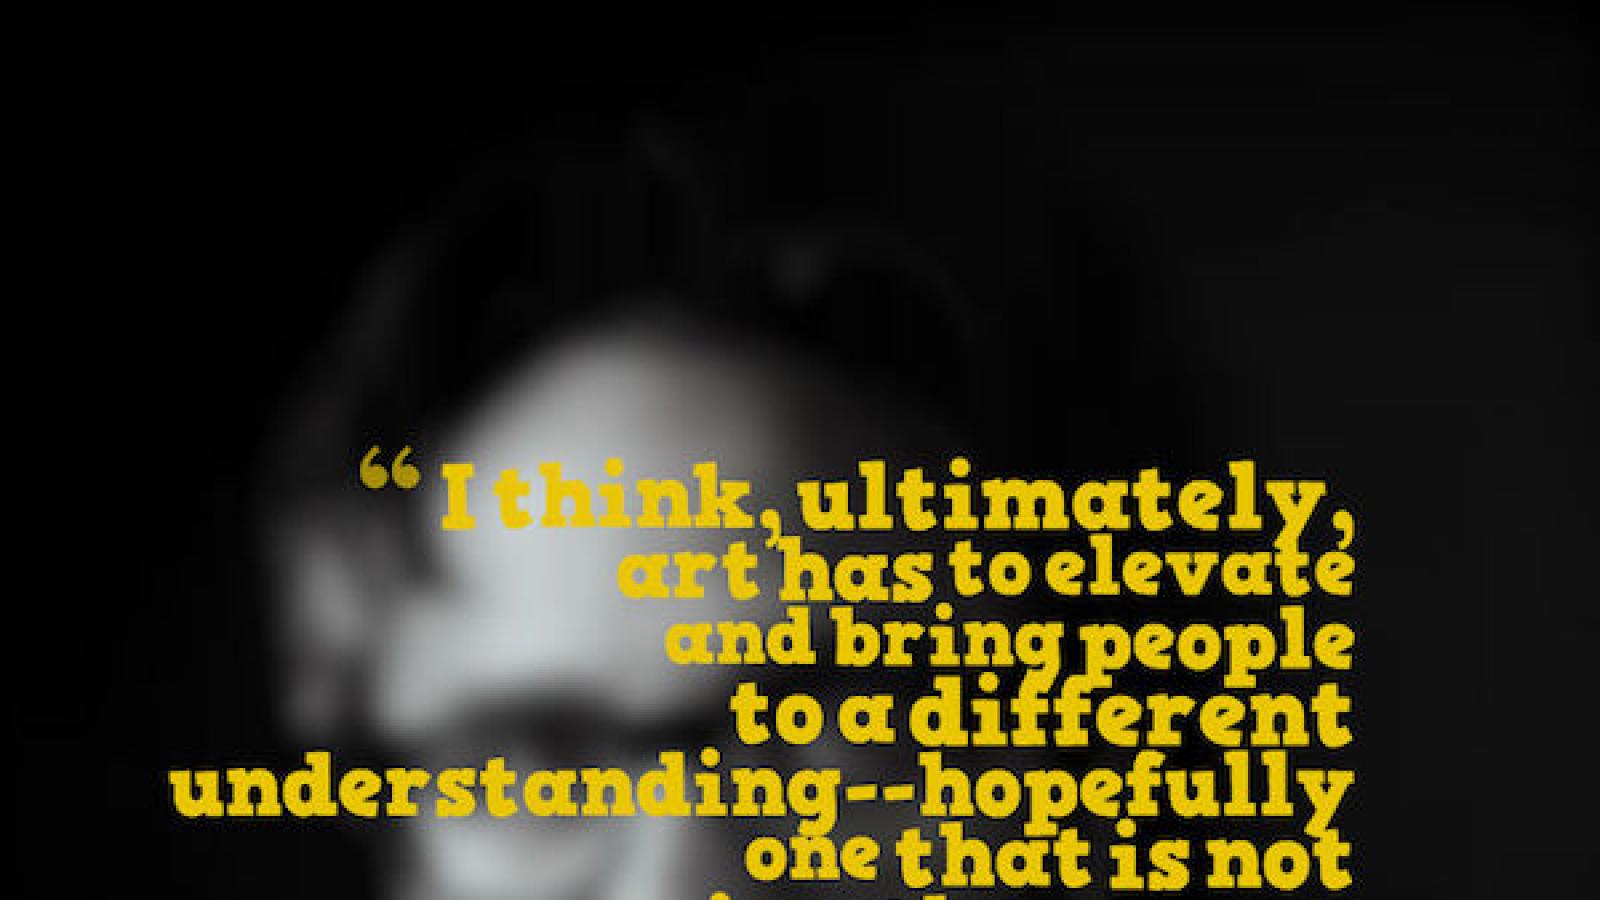 I think, ultimately, art has to elevate and bring people to a different understanding--hopefully one that is not going the wrong direction--Marc Maron. In yellow text over a blurred black and white photo of Maron